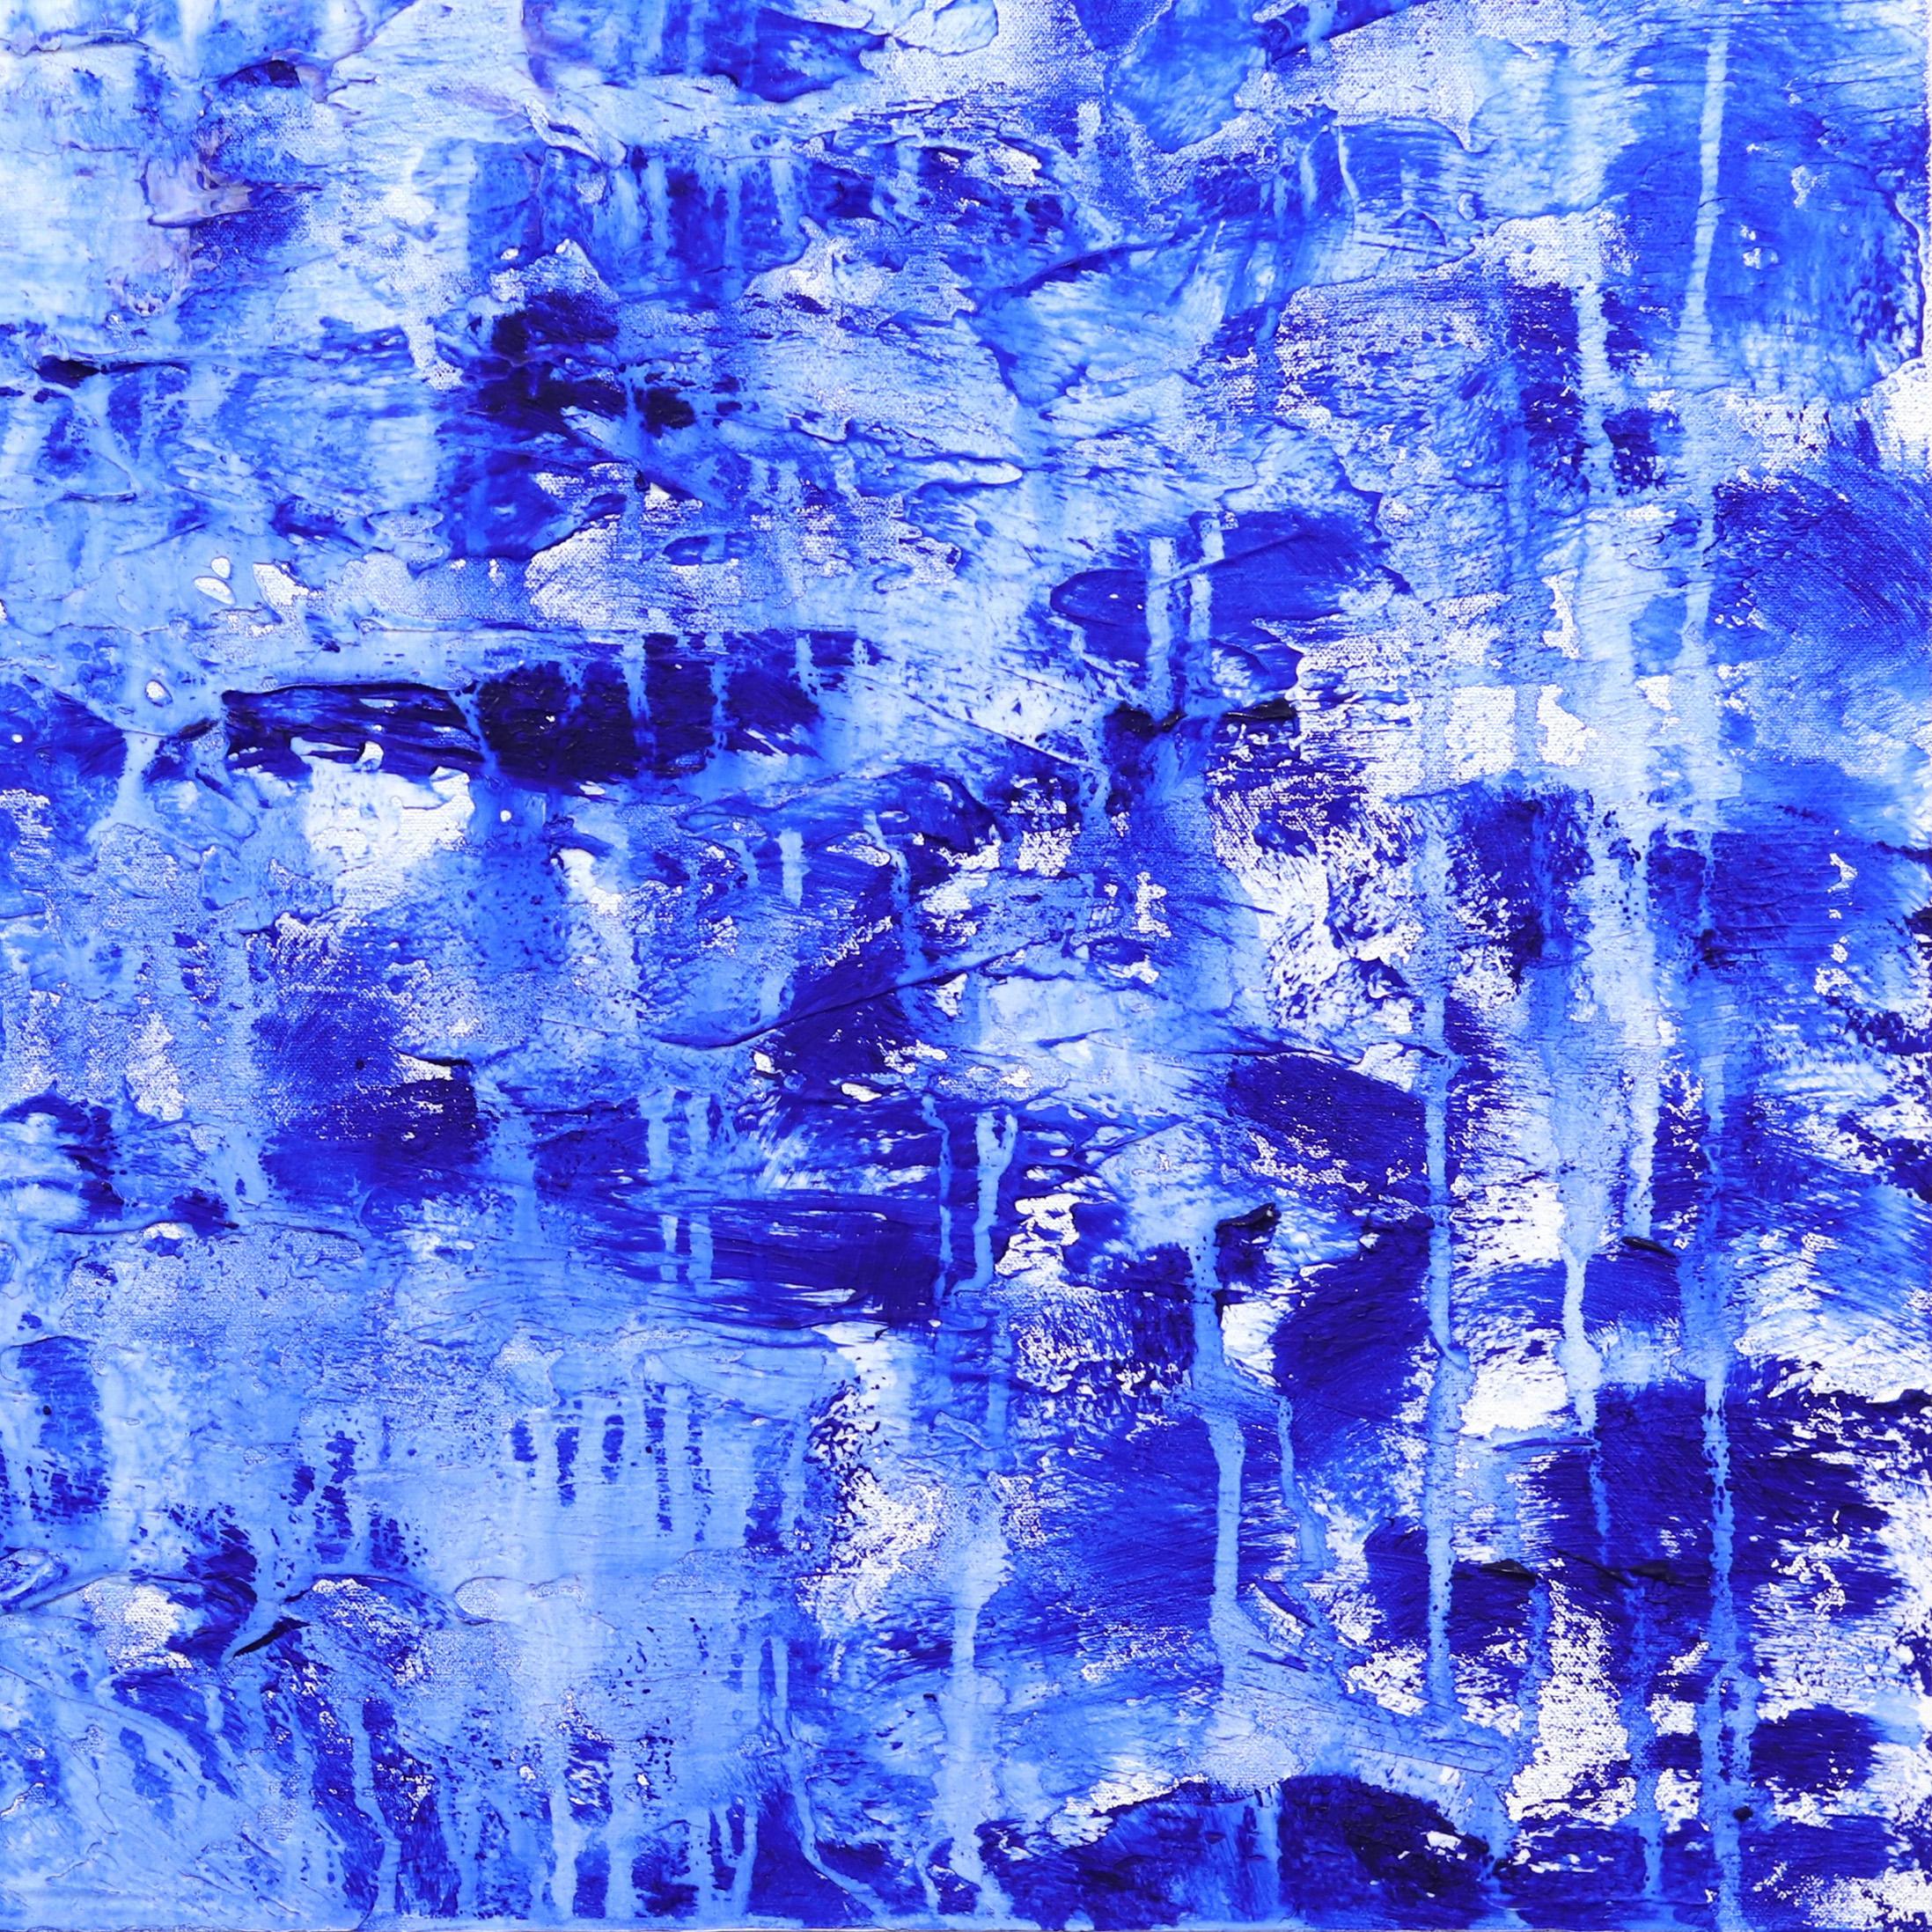 Oceanic Escape - Large Textured Blue White Abstract Oceanscape Water Painting For Sale 6